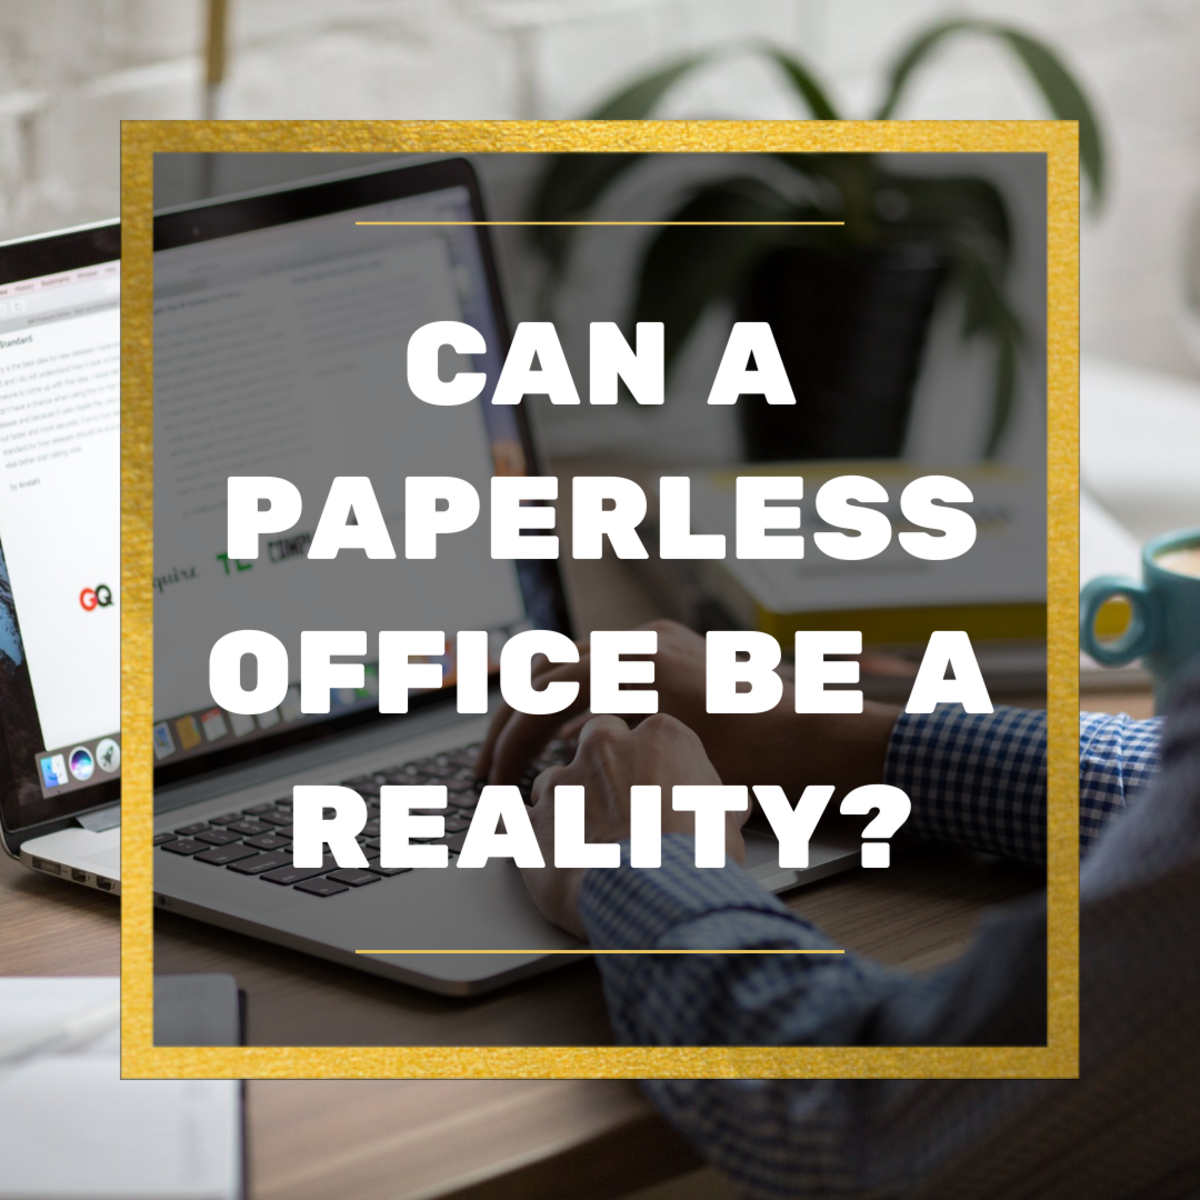 Can a Paperless Office Be a Reality? - An Essay